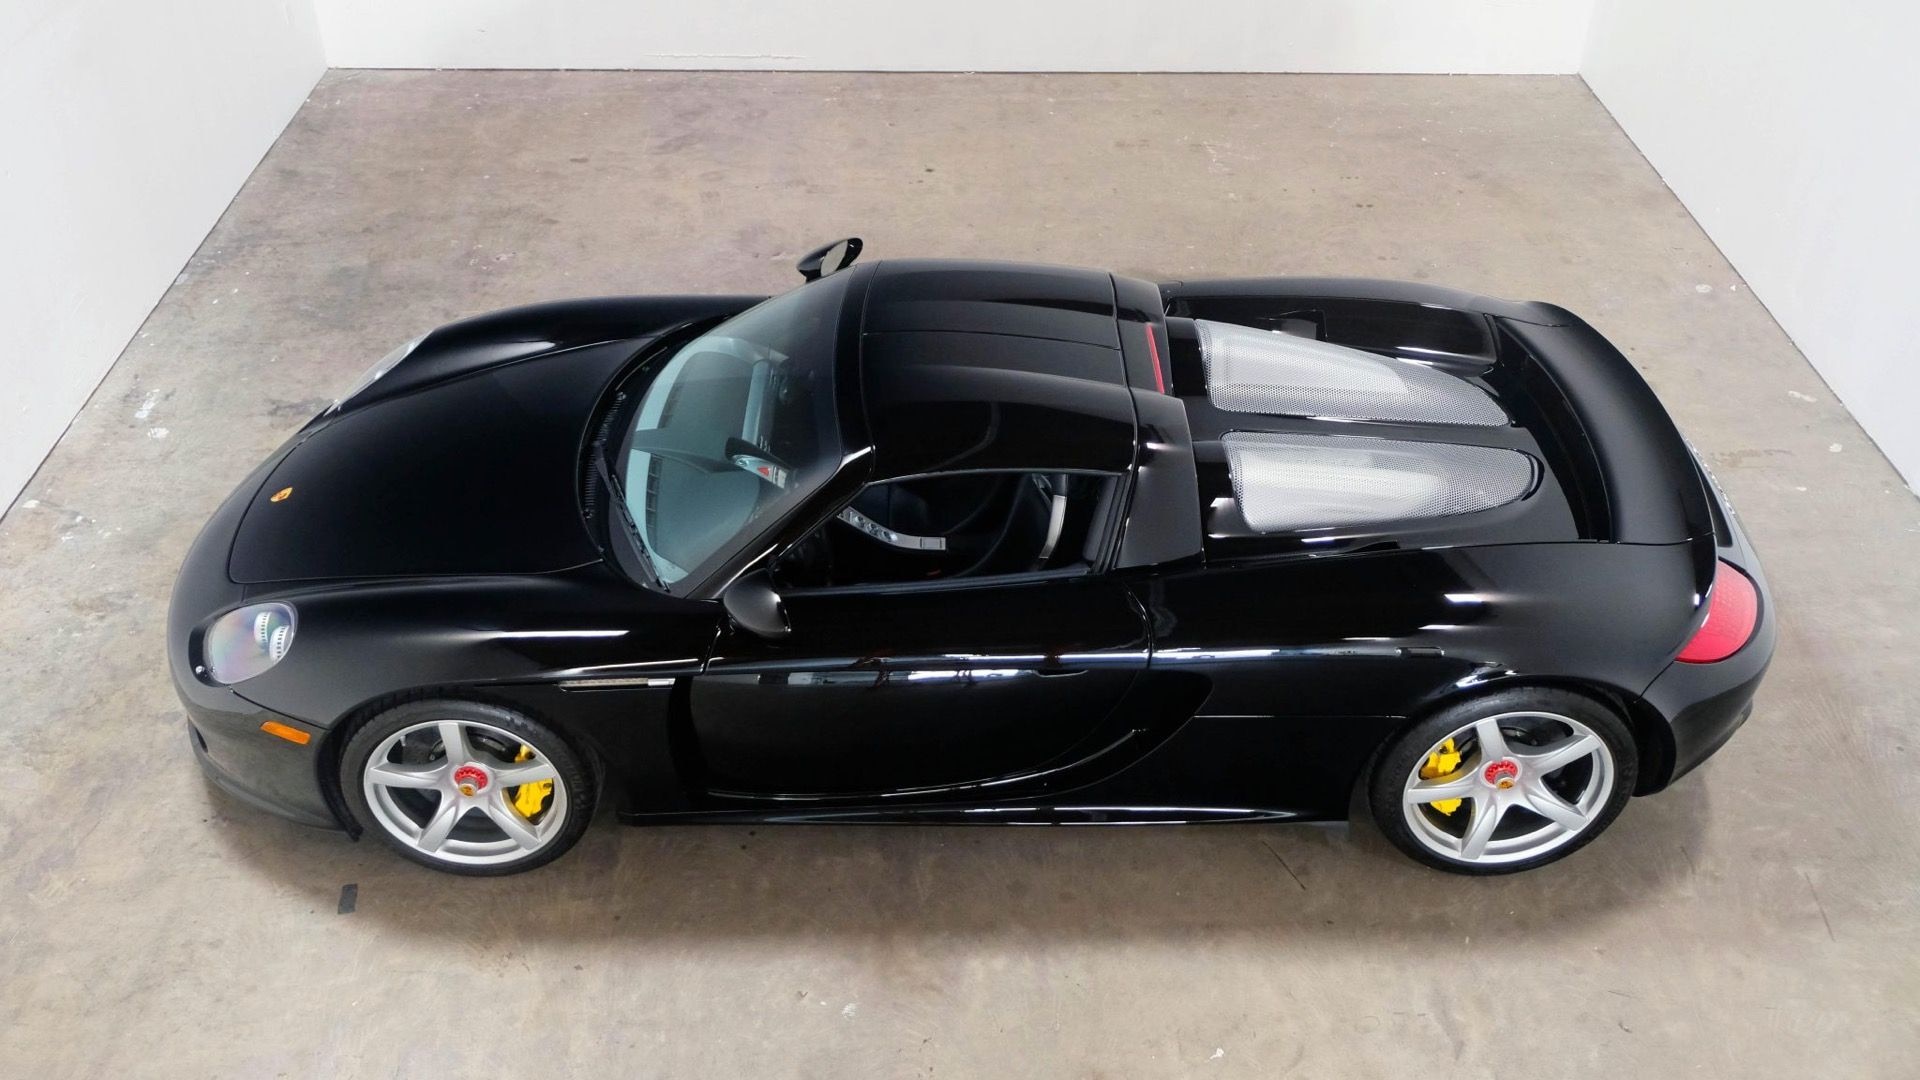 2004 Porsche Carrera GT once owned by Jerry Seinfeld (photo via Bring a Trailer)